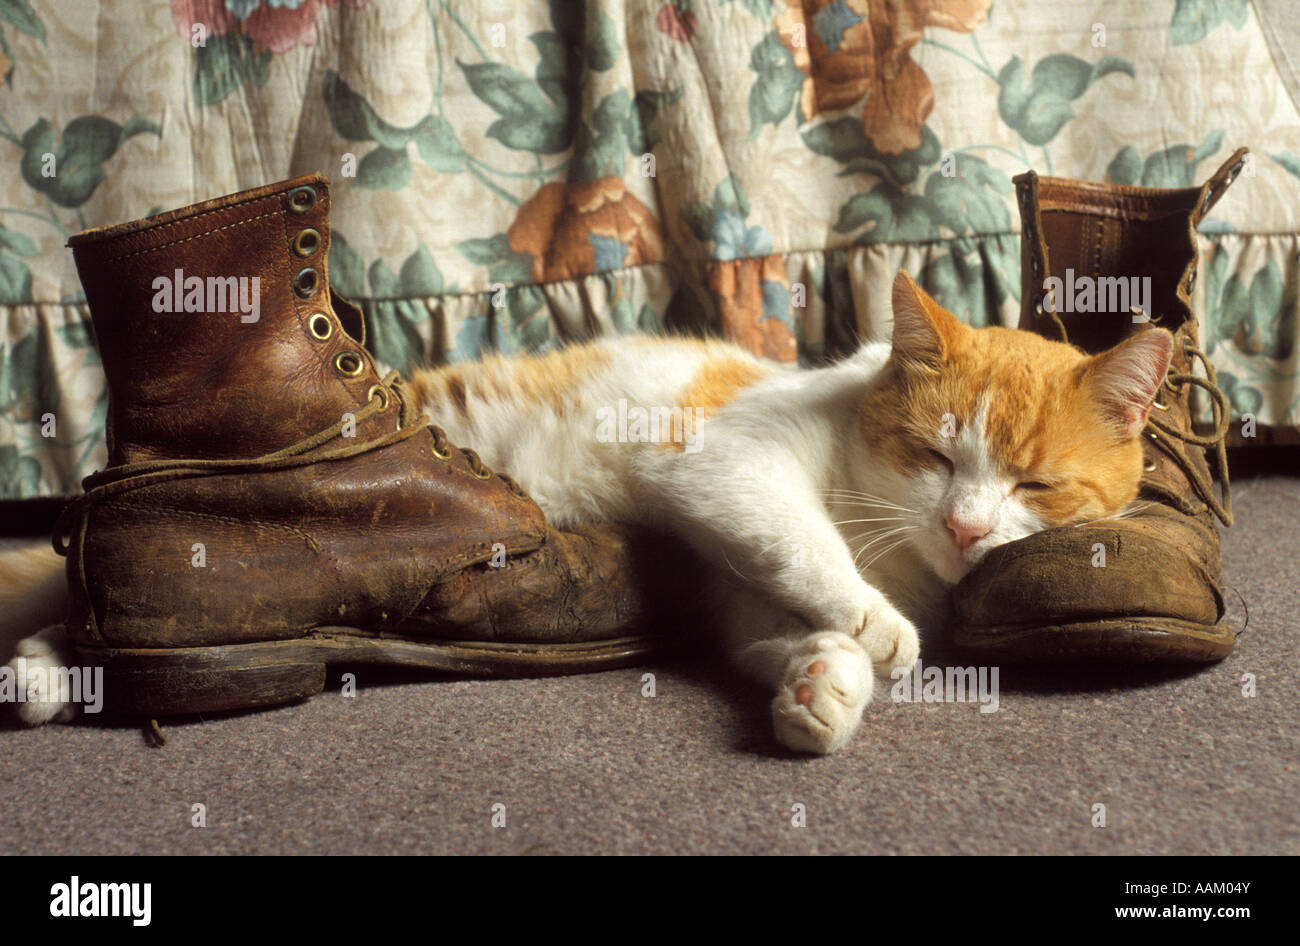 GINGER AND WHITE TABBY CAT SLEEPING ON OLD WORN WORK BOOTS Stock Photo